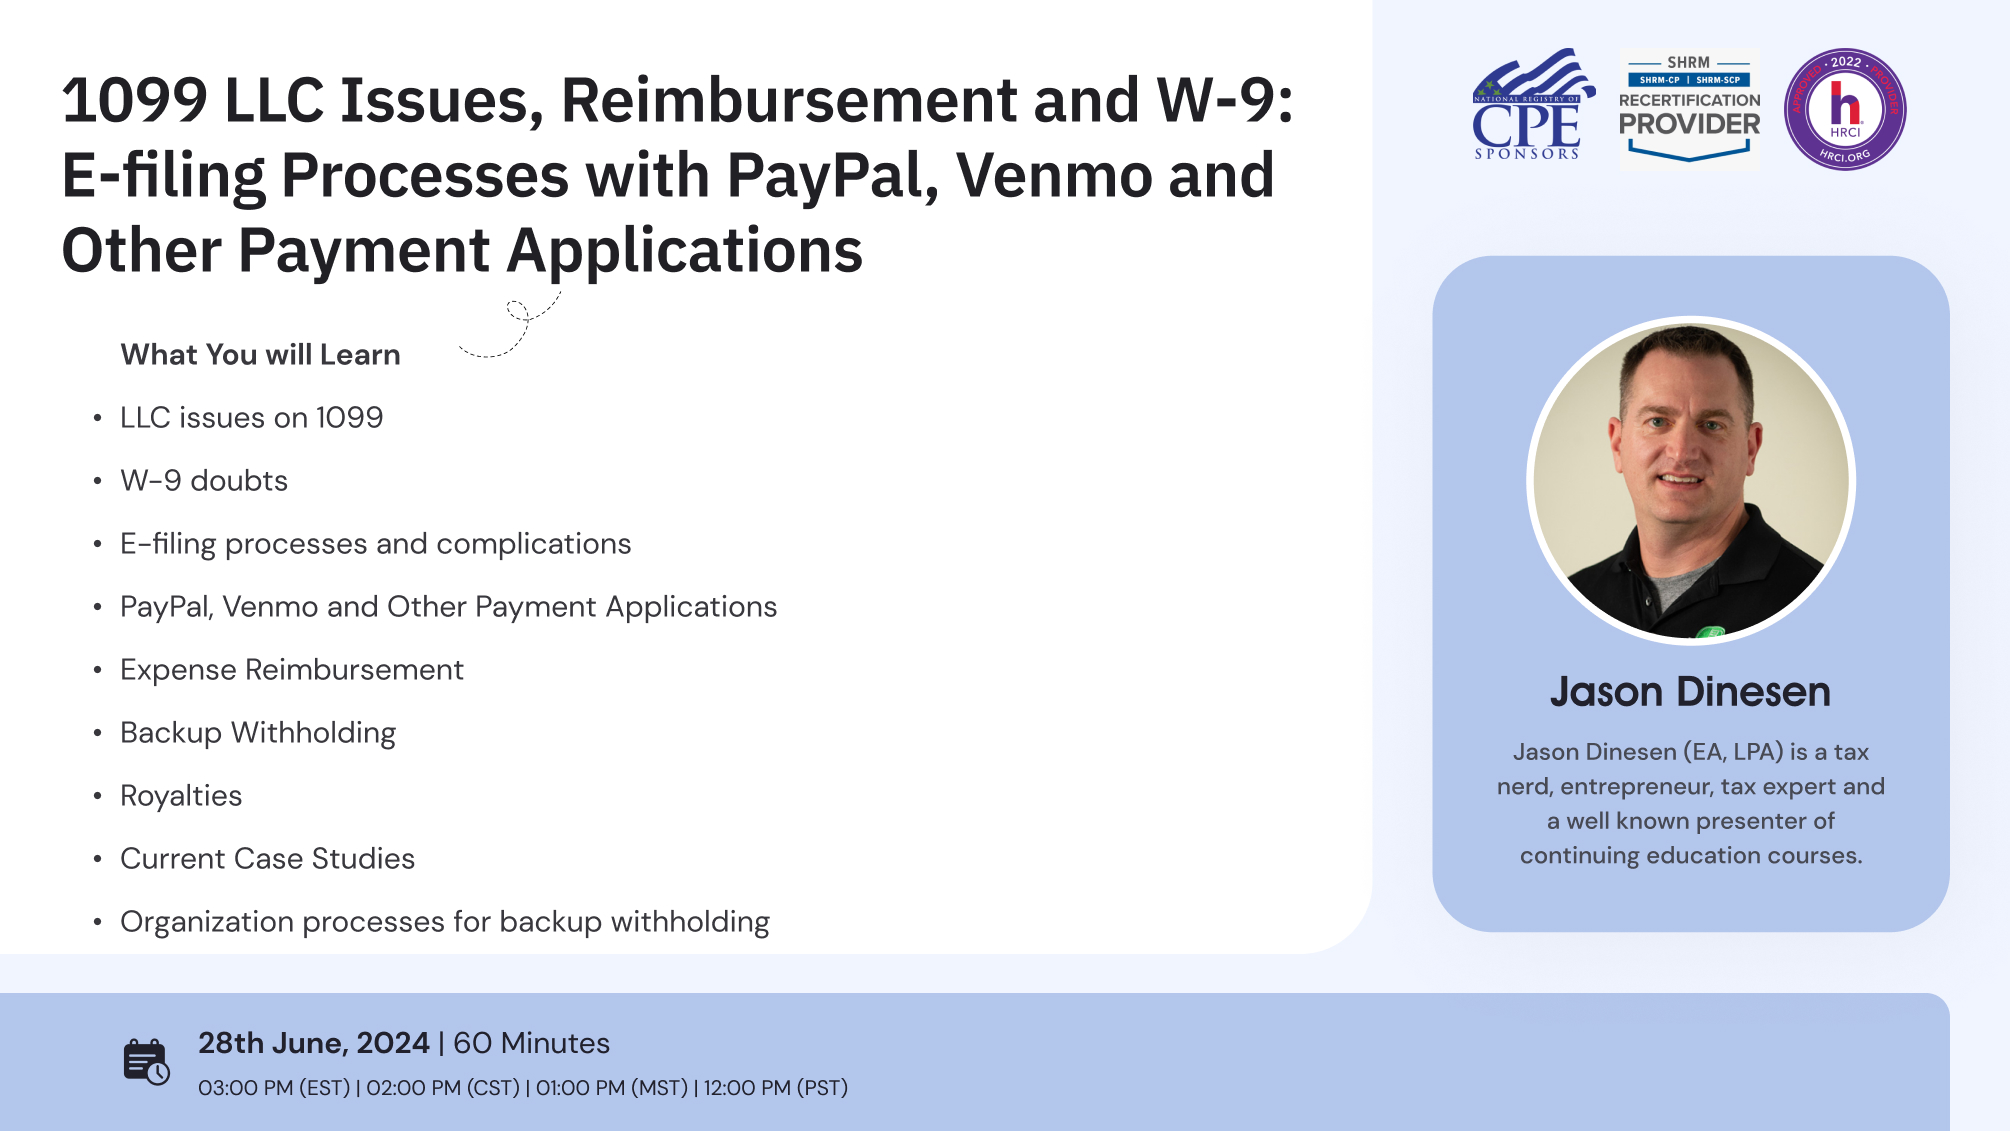 1099 LLC Issues, Reimbursement and W-9: E-filing Processes with PayPal, Venmo and Other Payment Applications